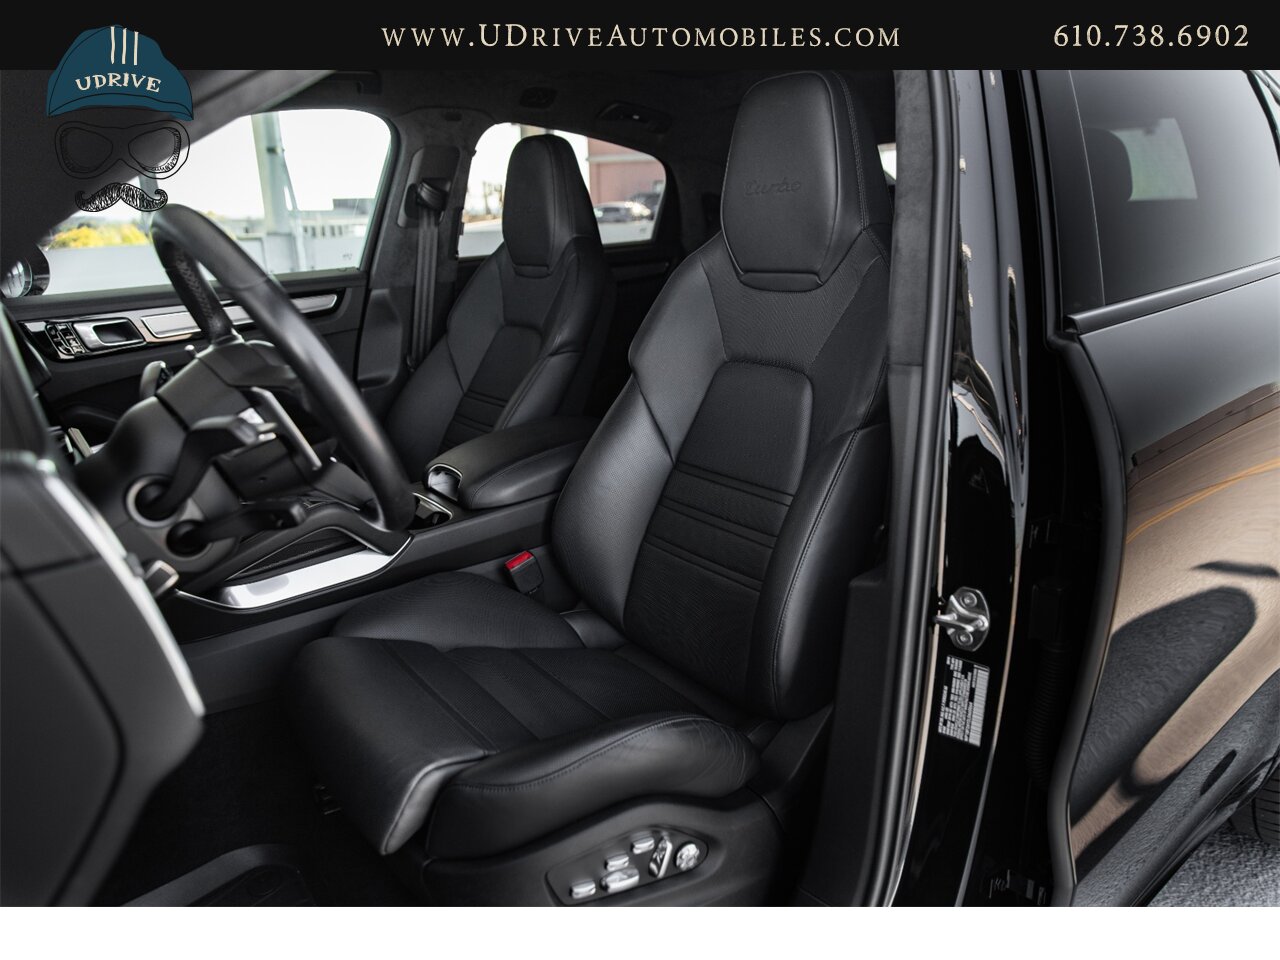 2020 Porsche Cayenne Turbo Coupe 2+1 Rear Comf Seats Prem Plus  22in Turbo Design Whls Sport Exhst Adap Cruise Surround View - Photo 6 - West Chester, PA 19382